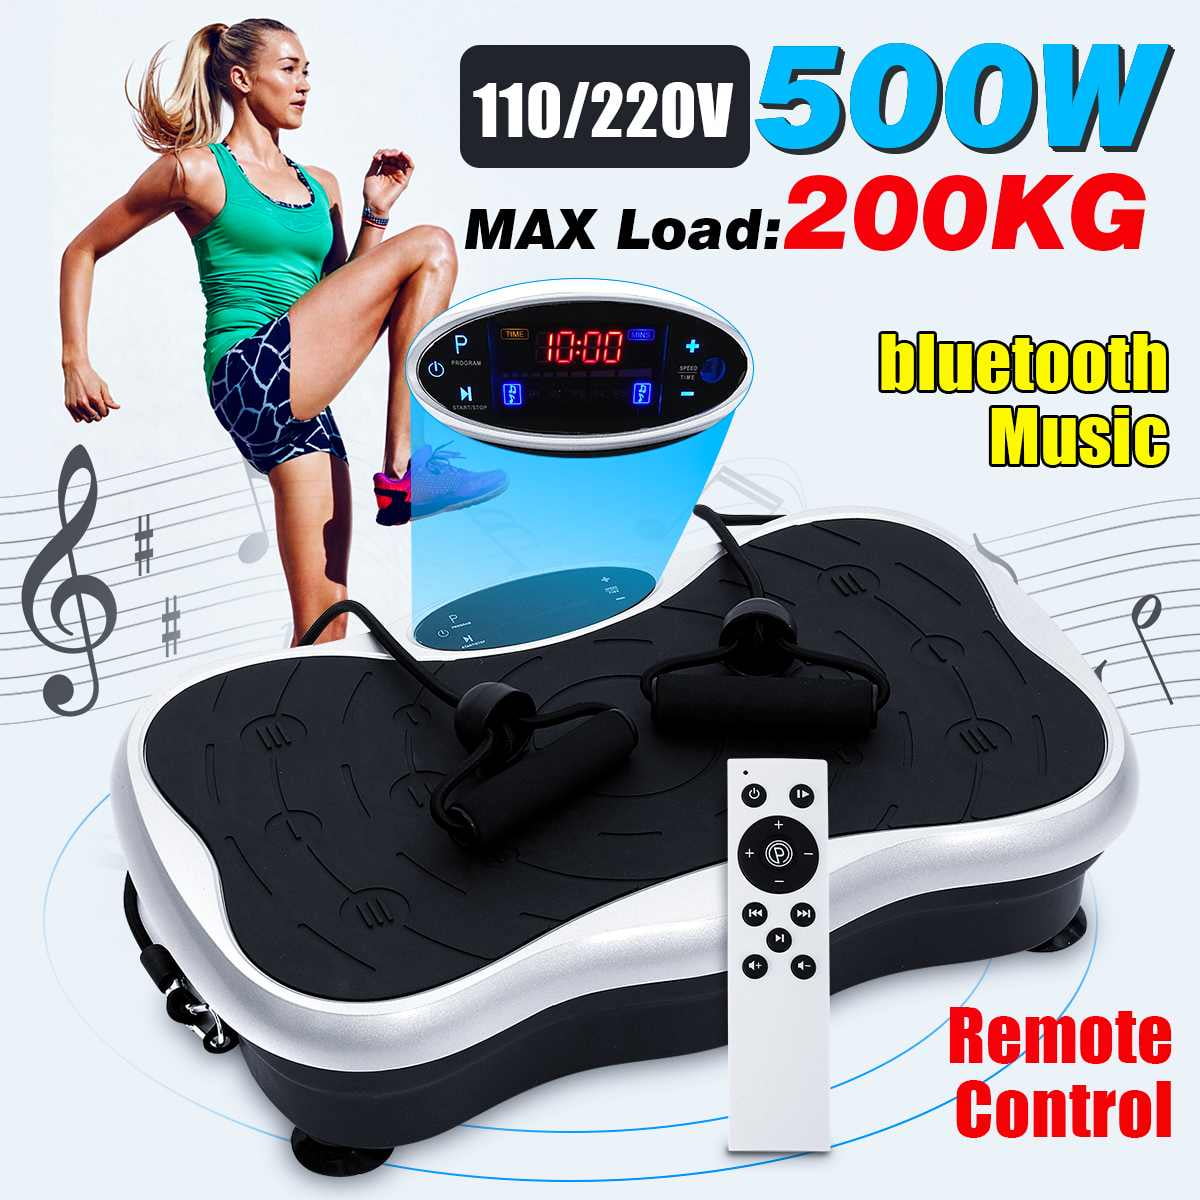 Whole Body Workout Fitness Vibration Platform Machine with Remote Control and Music Speaker.Max Load 220lbs Vibration Plate Exercise Machines 